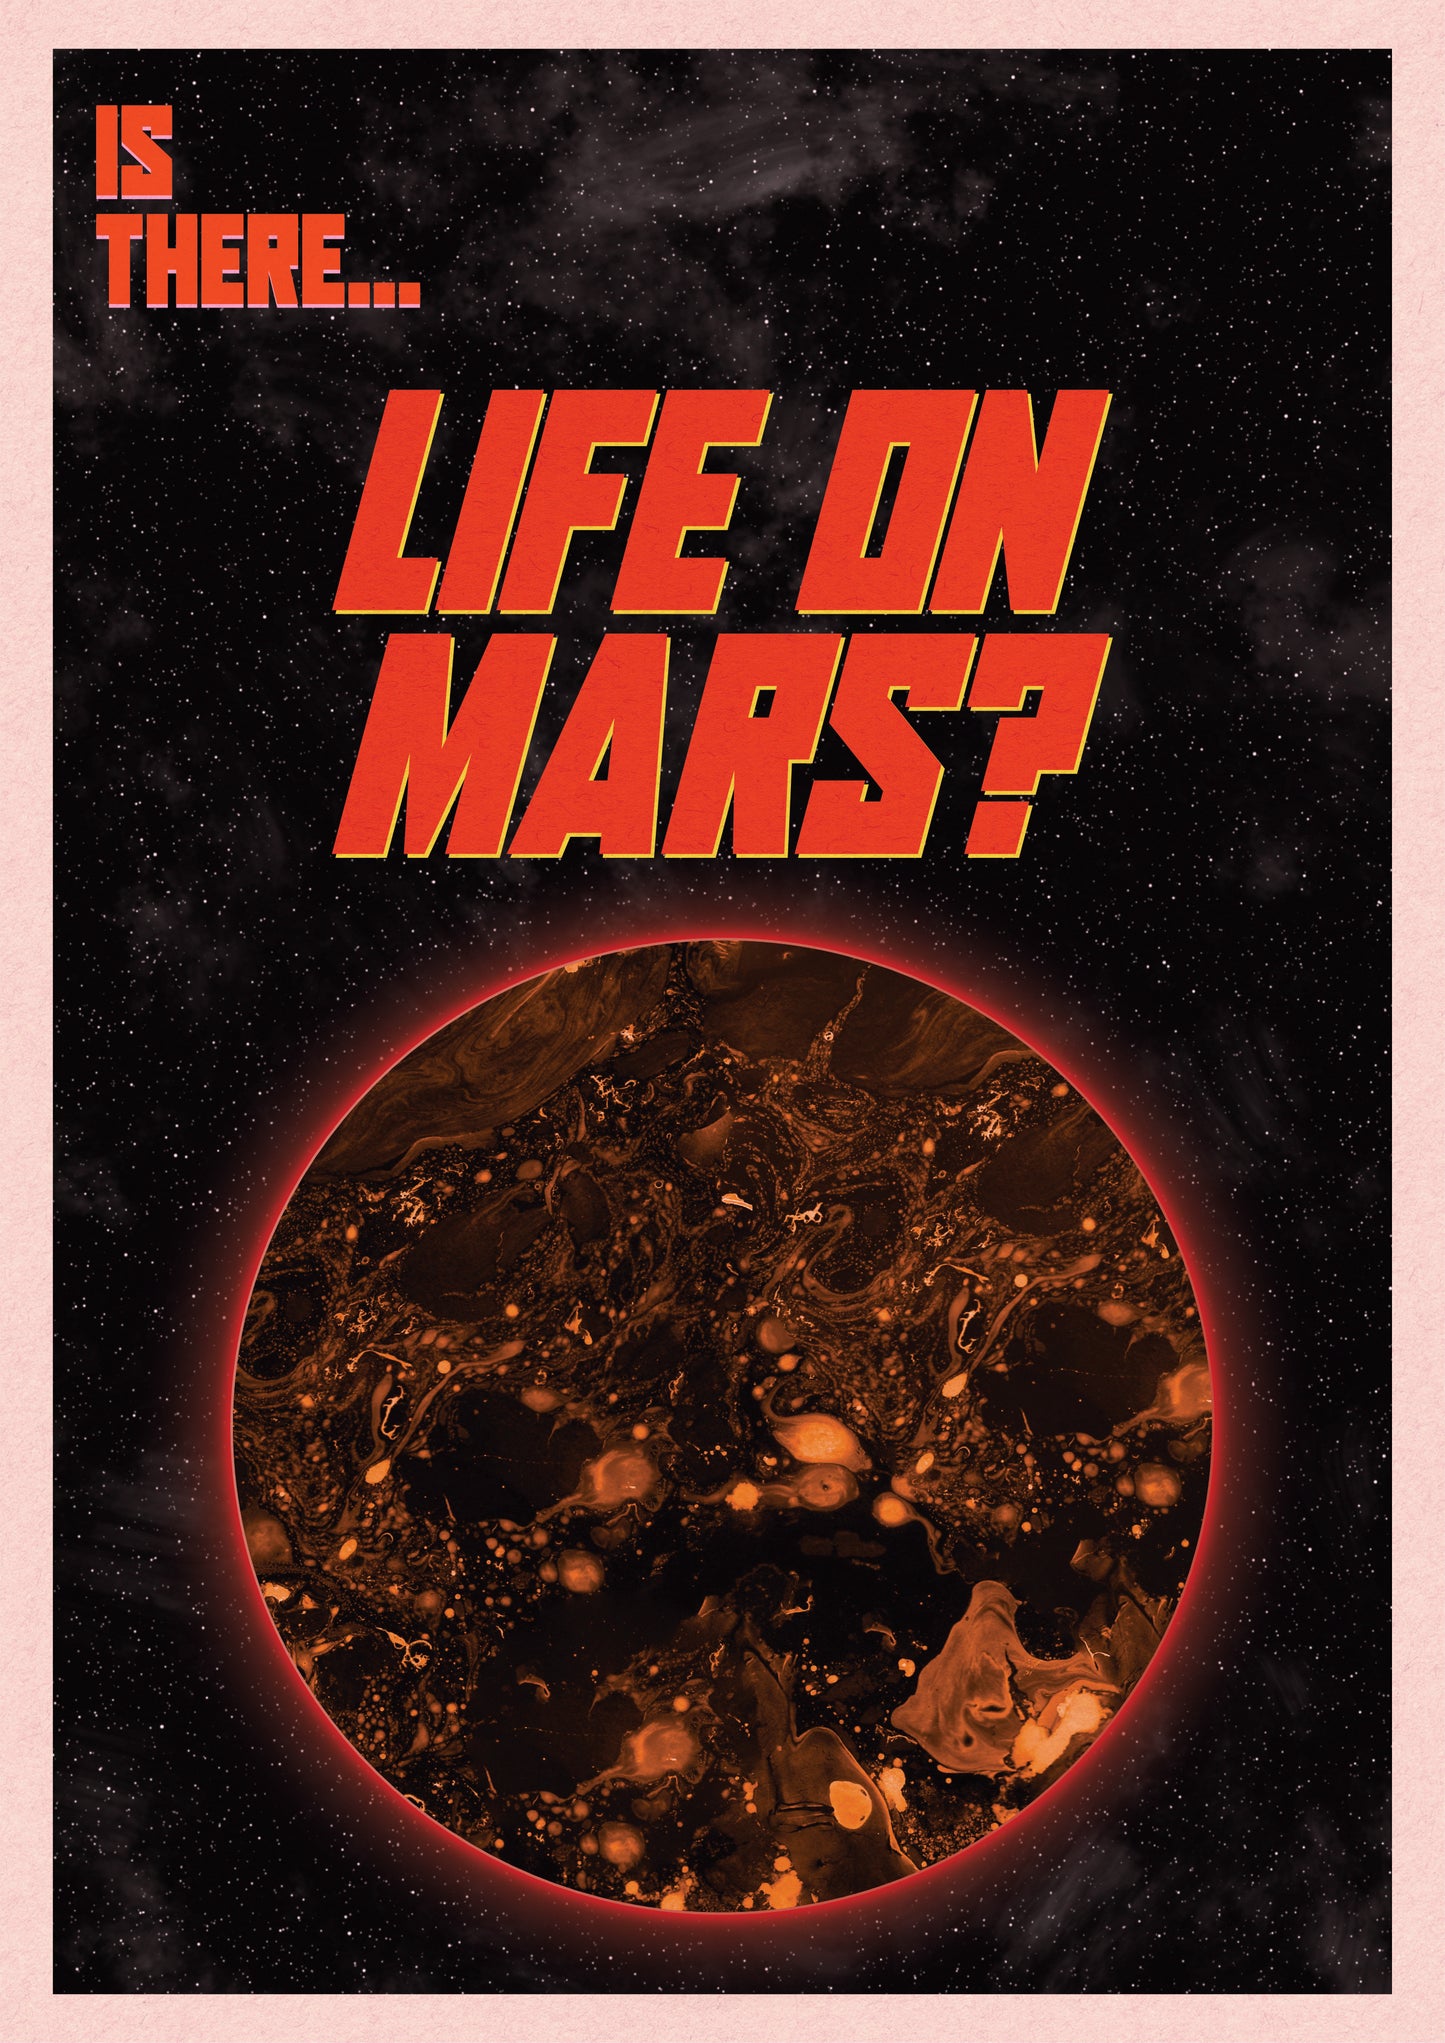 IS THERE LIFE ON MARS?